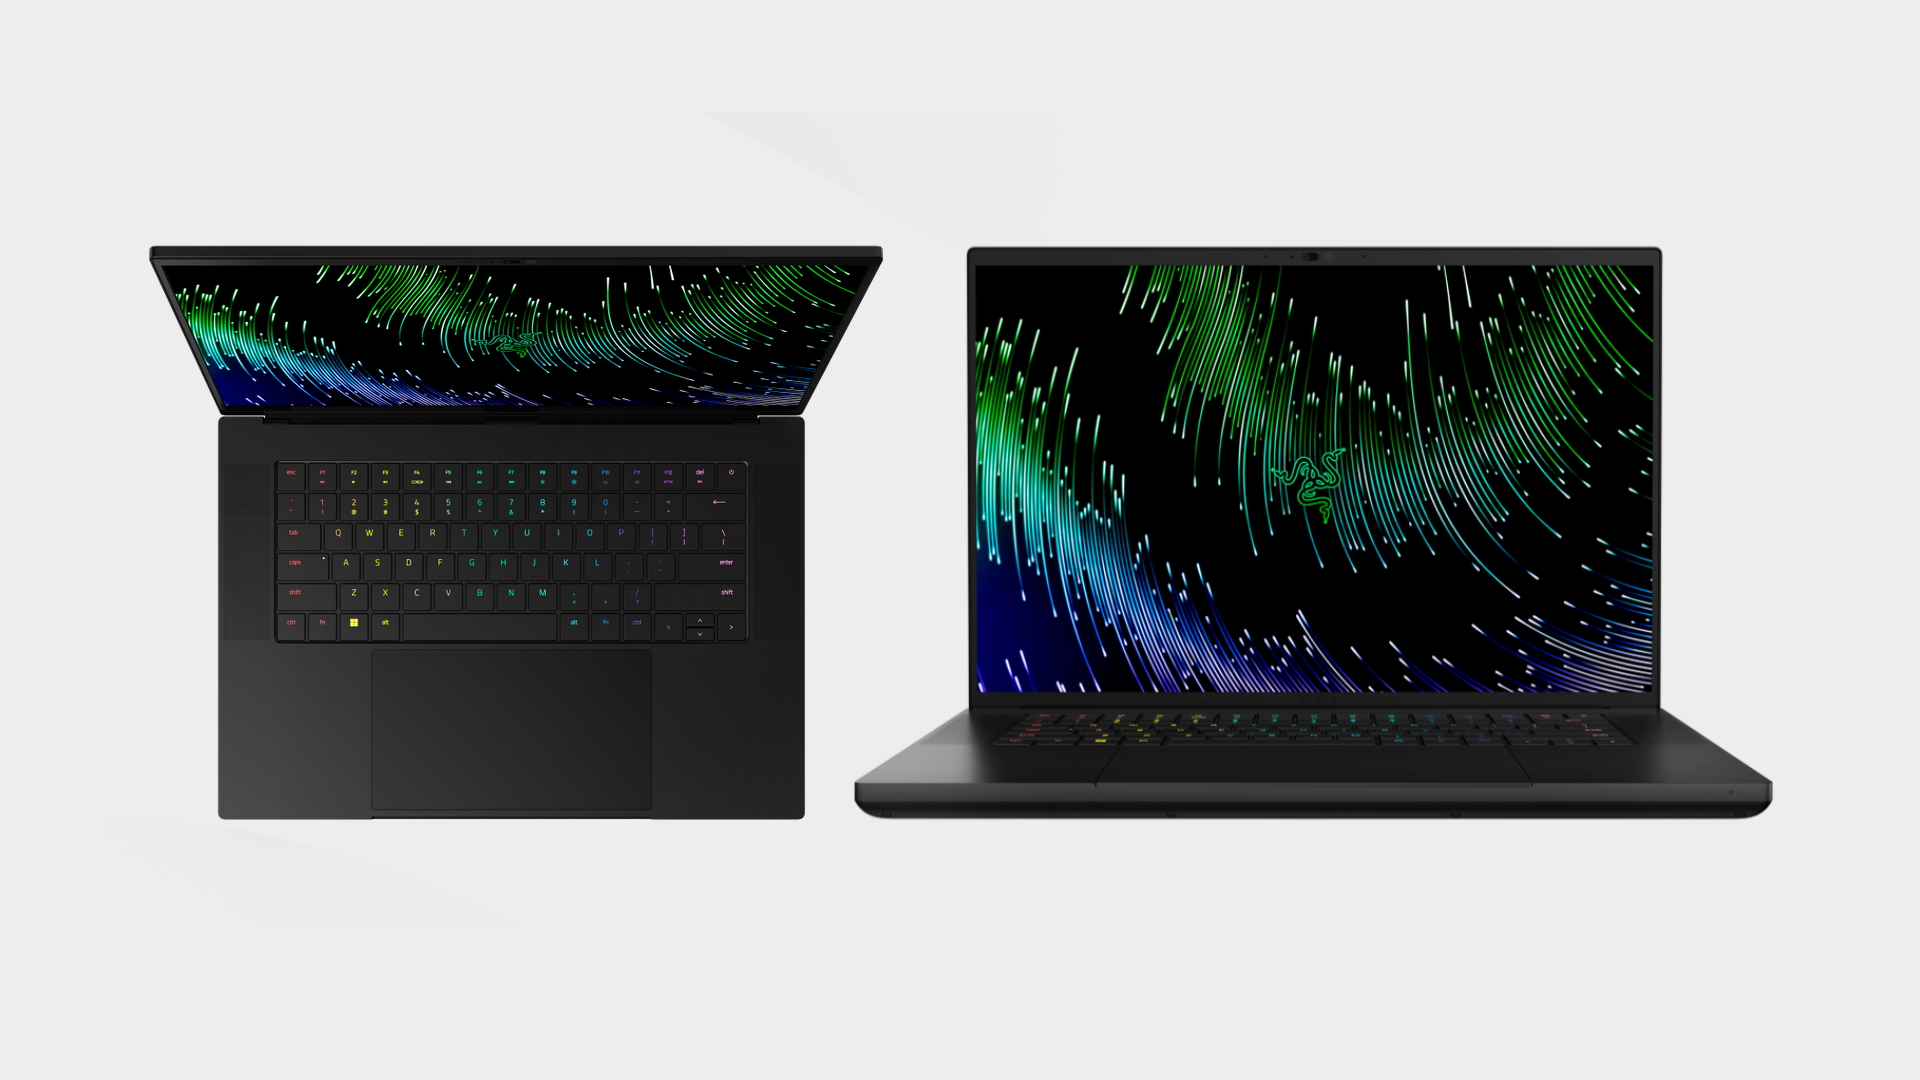 The Razer Blade 16 front and top view.